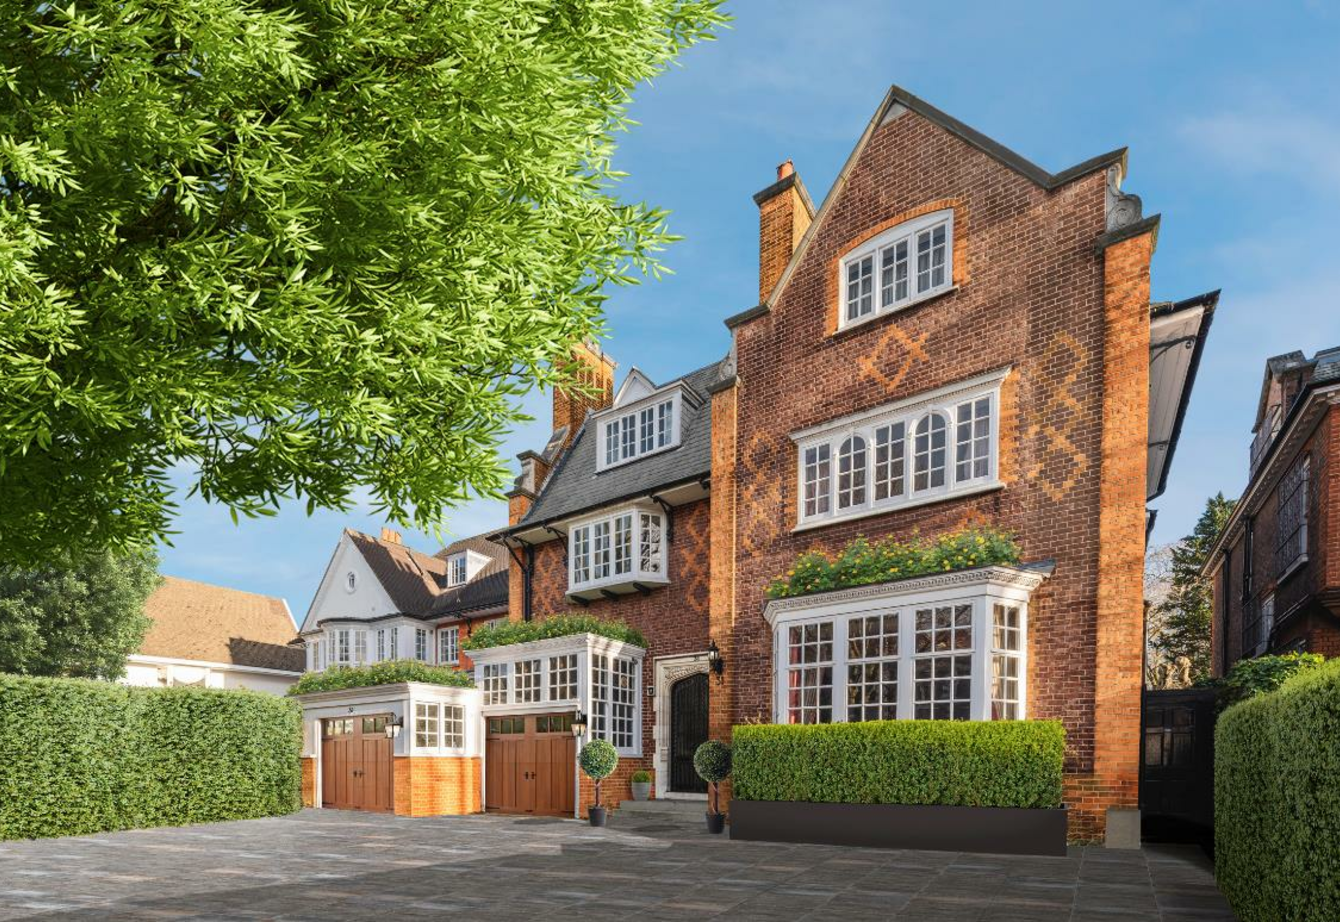 for-sale-elsworthy-road-london-400-view1